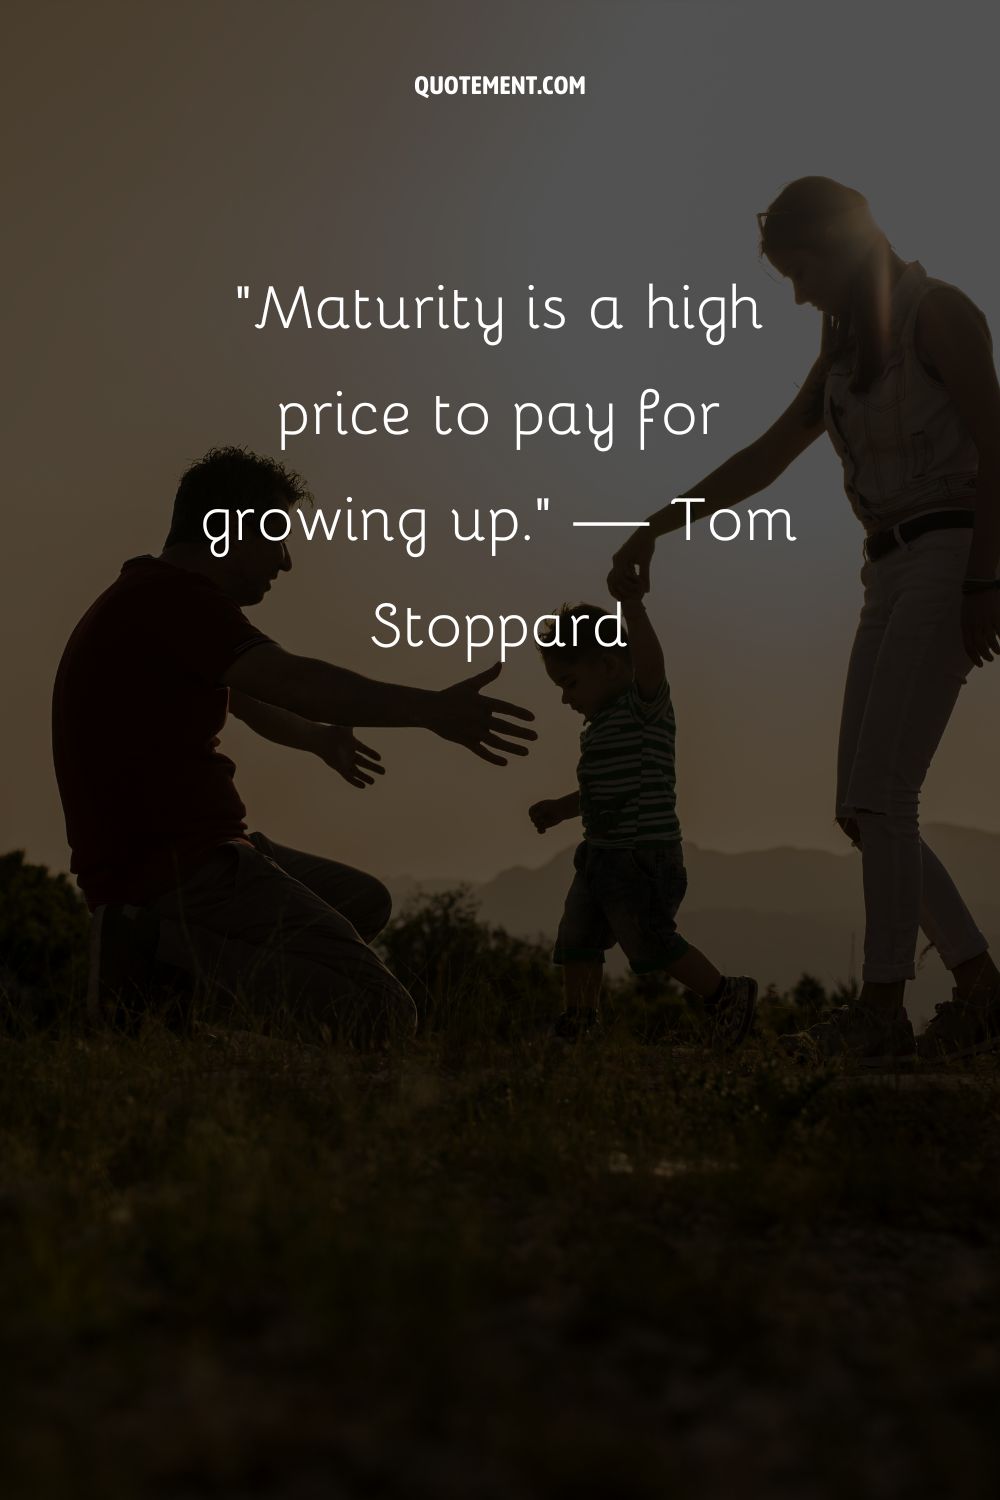 Mom, dad and little one together representing a quote about maturity.